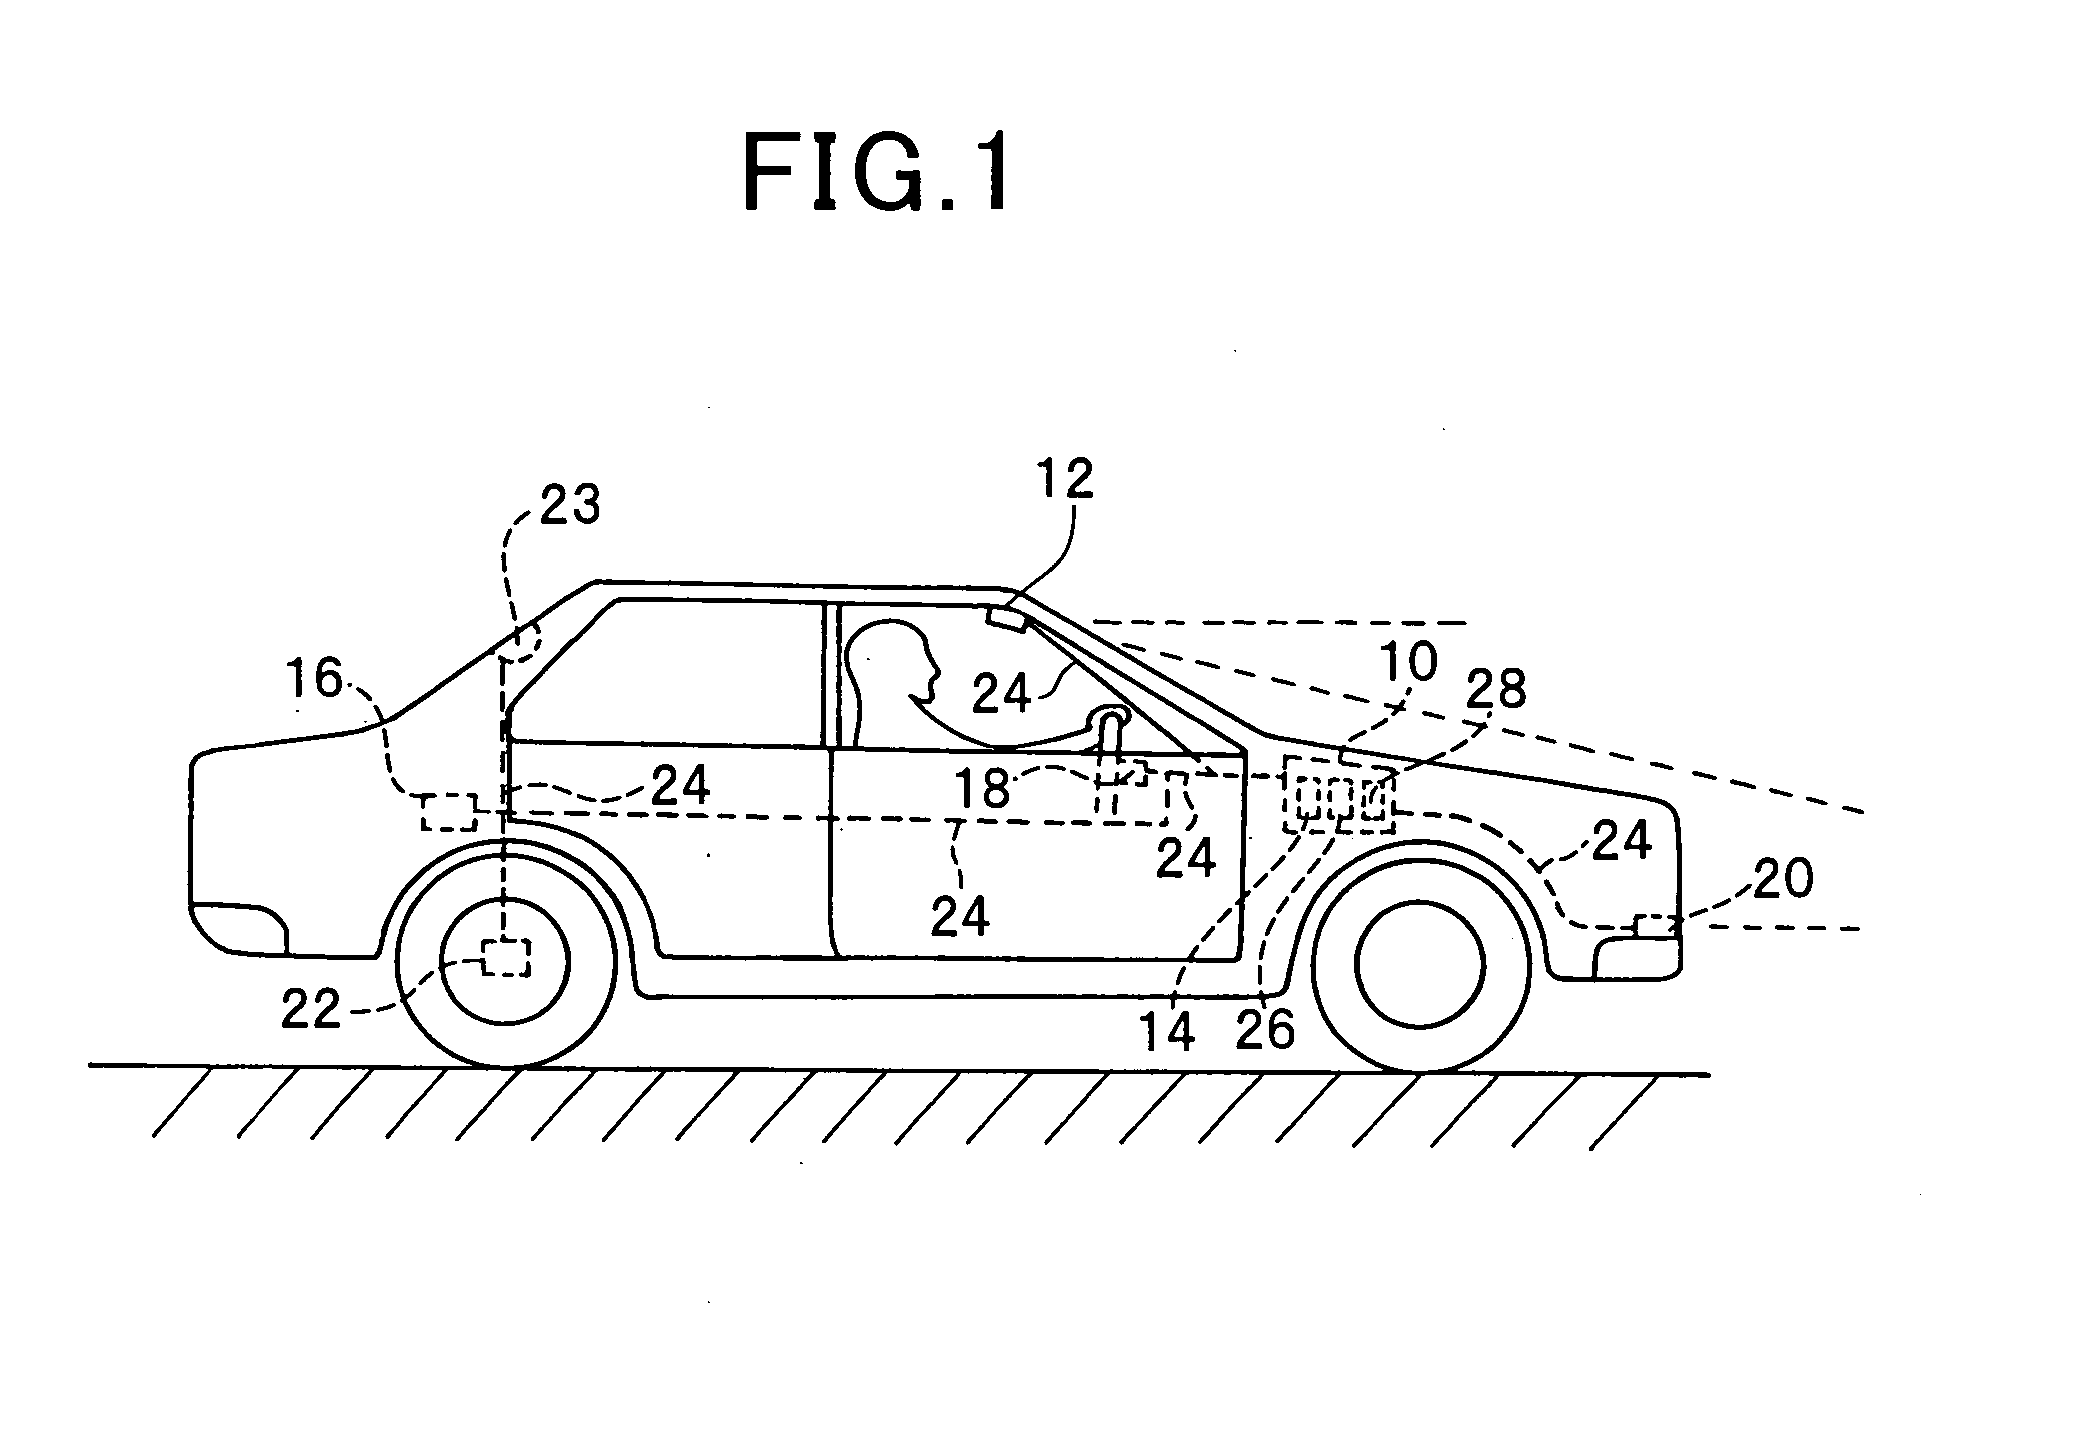 Apparatus for determining the presence of fog using image obtained by vehicle-mounted device